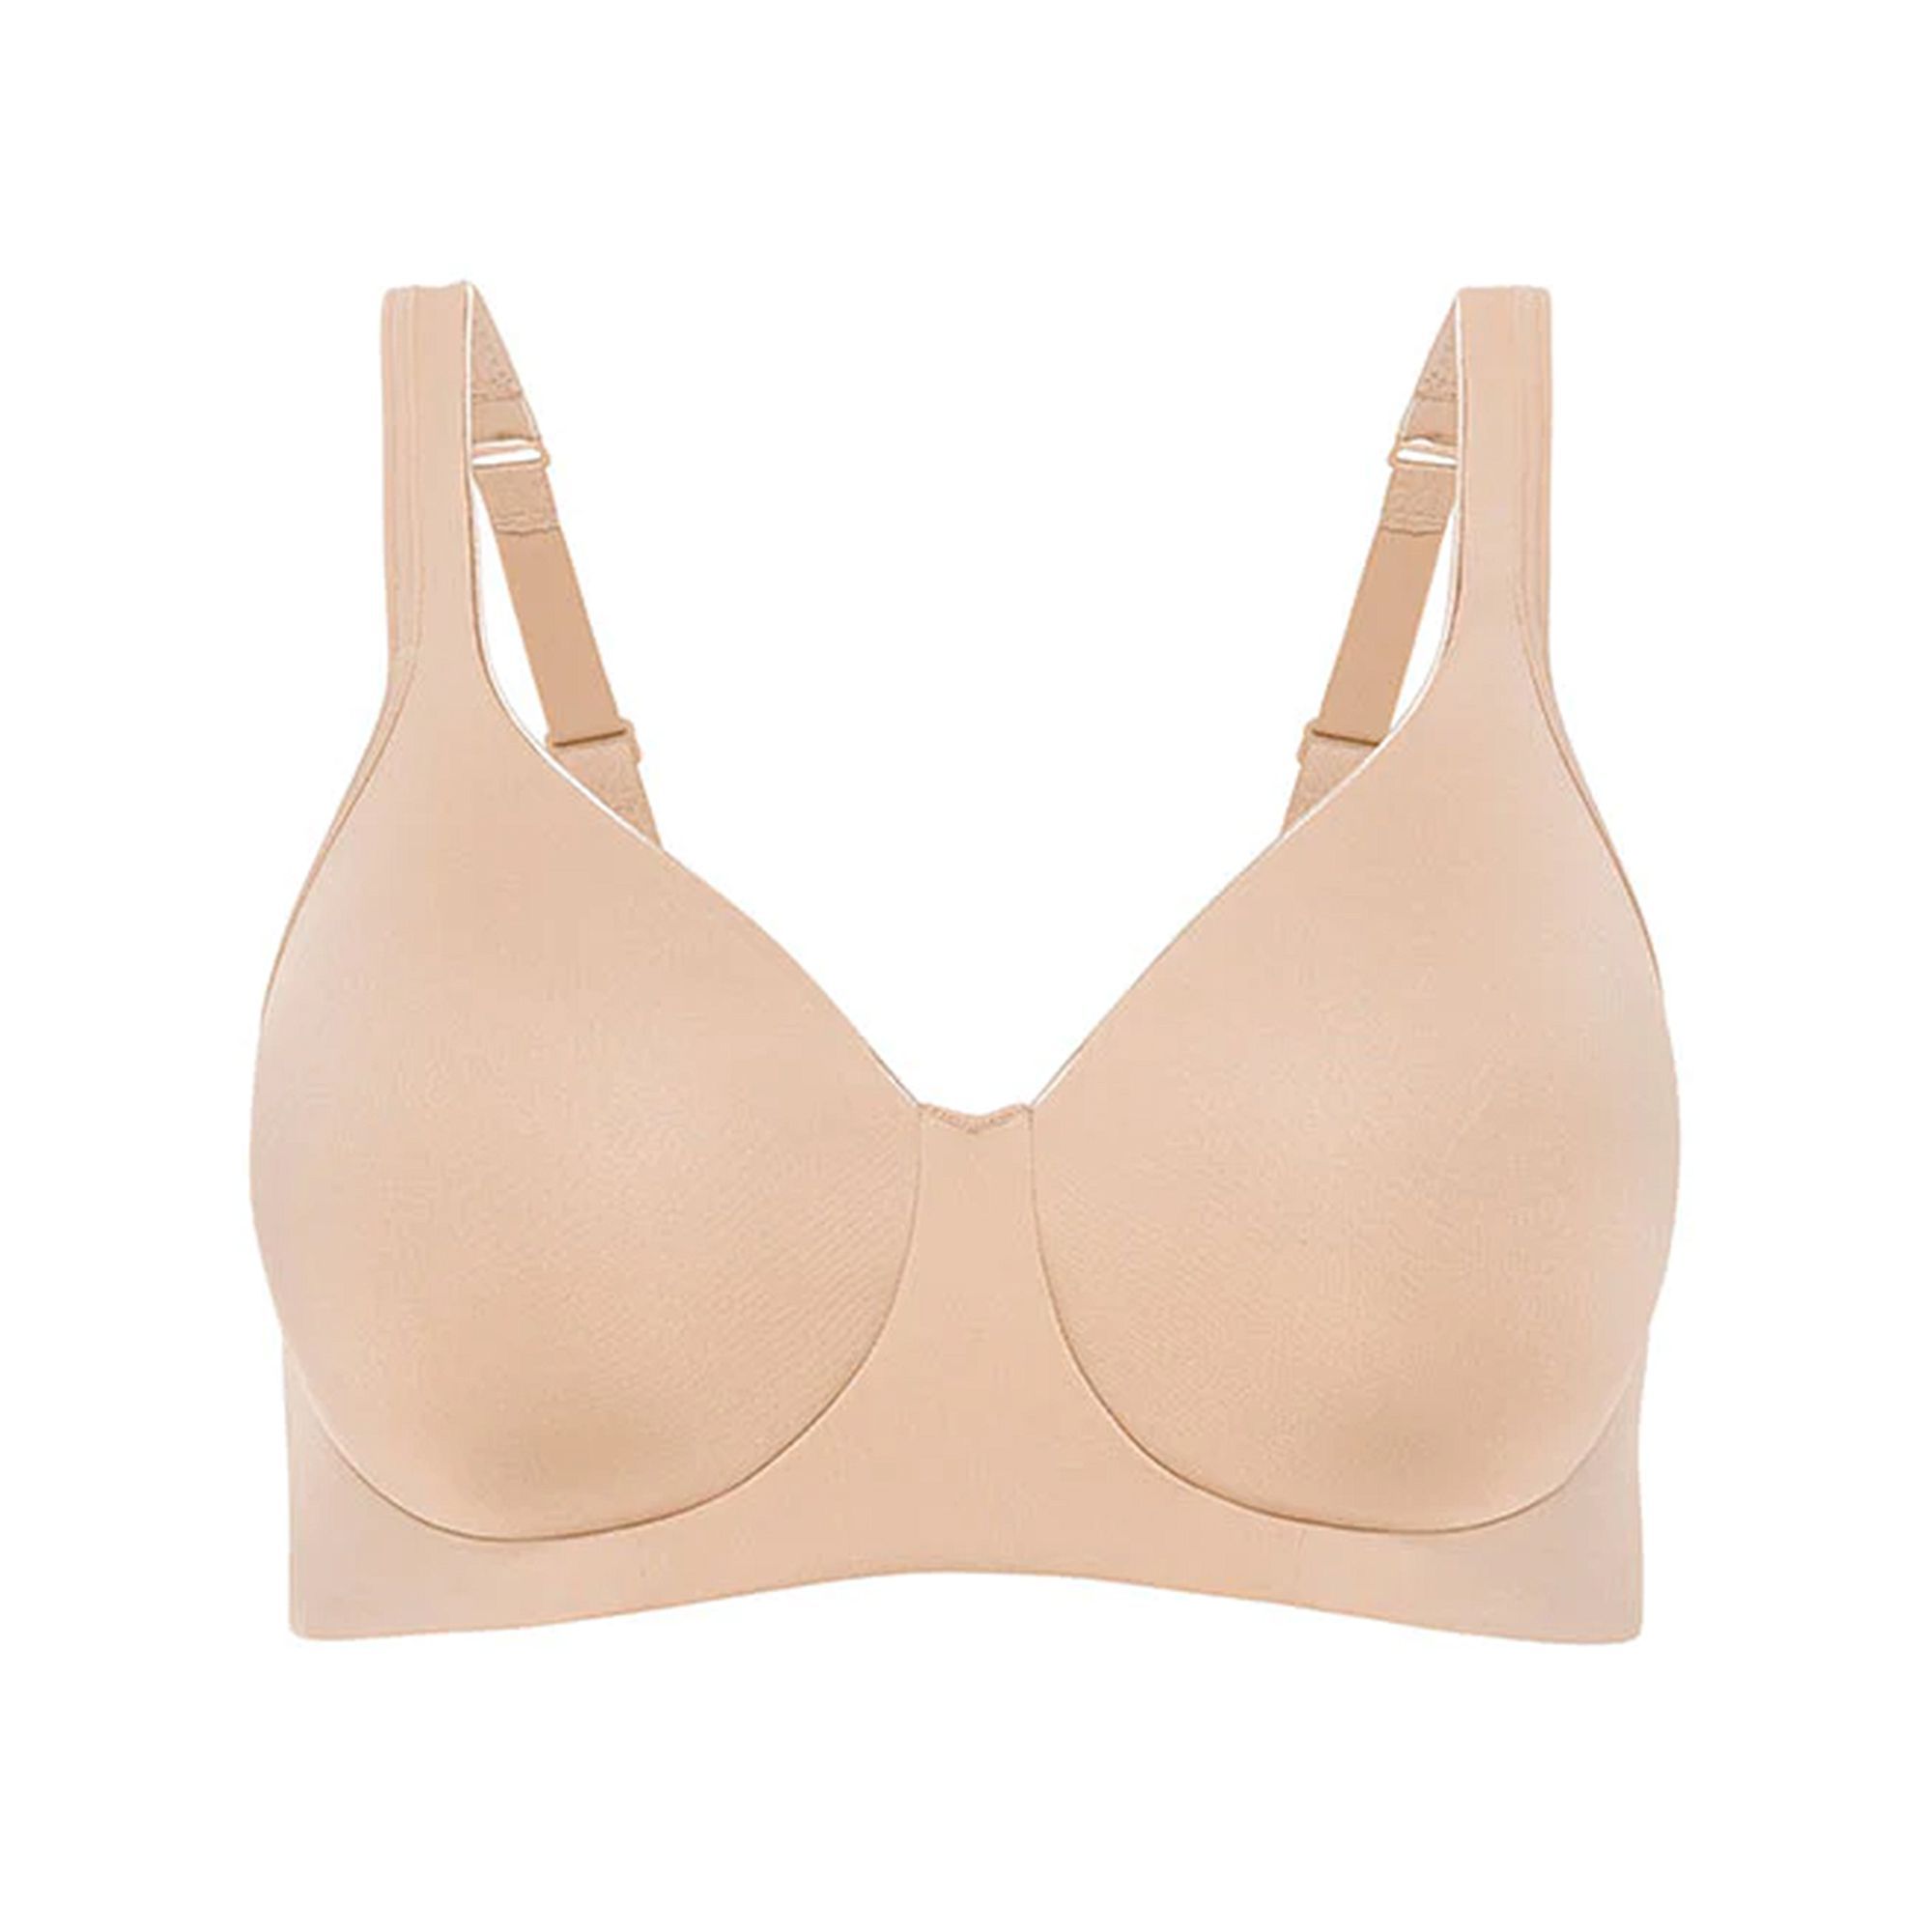 Buy Jockey Forever Fit Full Coverage Molded Cup Bra, Cream Tan